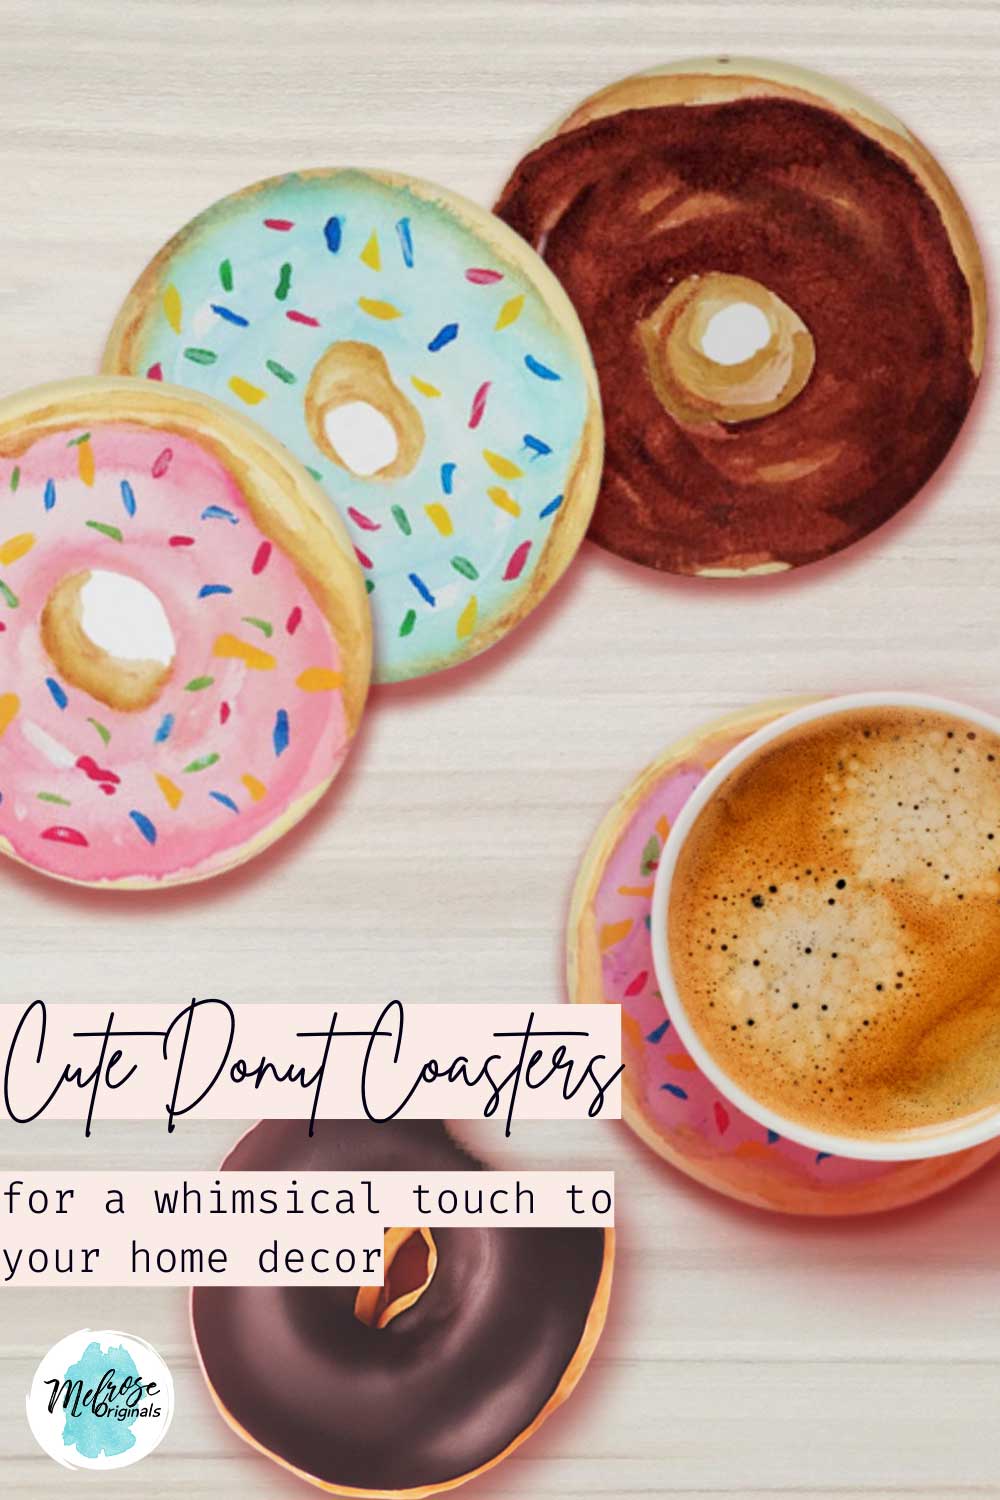 round acrylic coasters that look like whimsical donuts with sprinkles